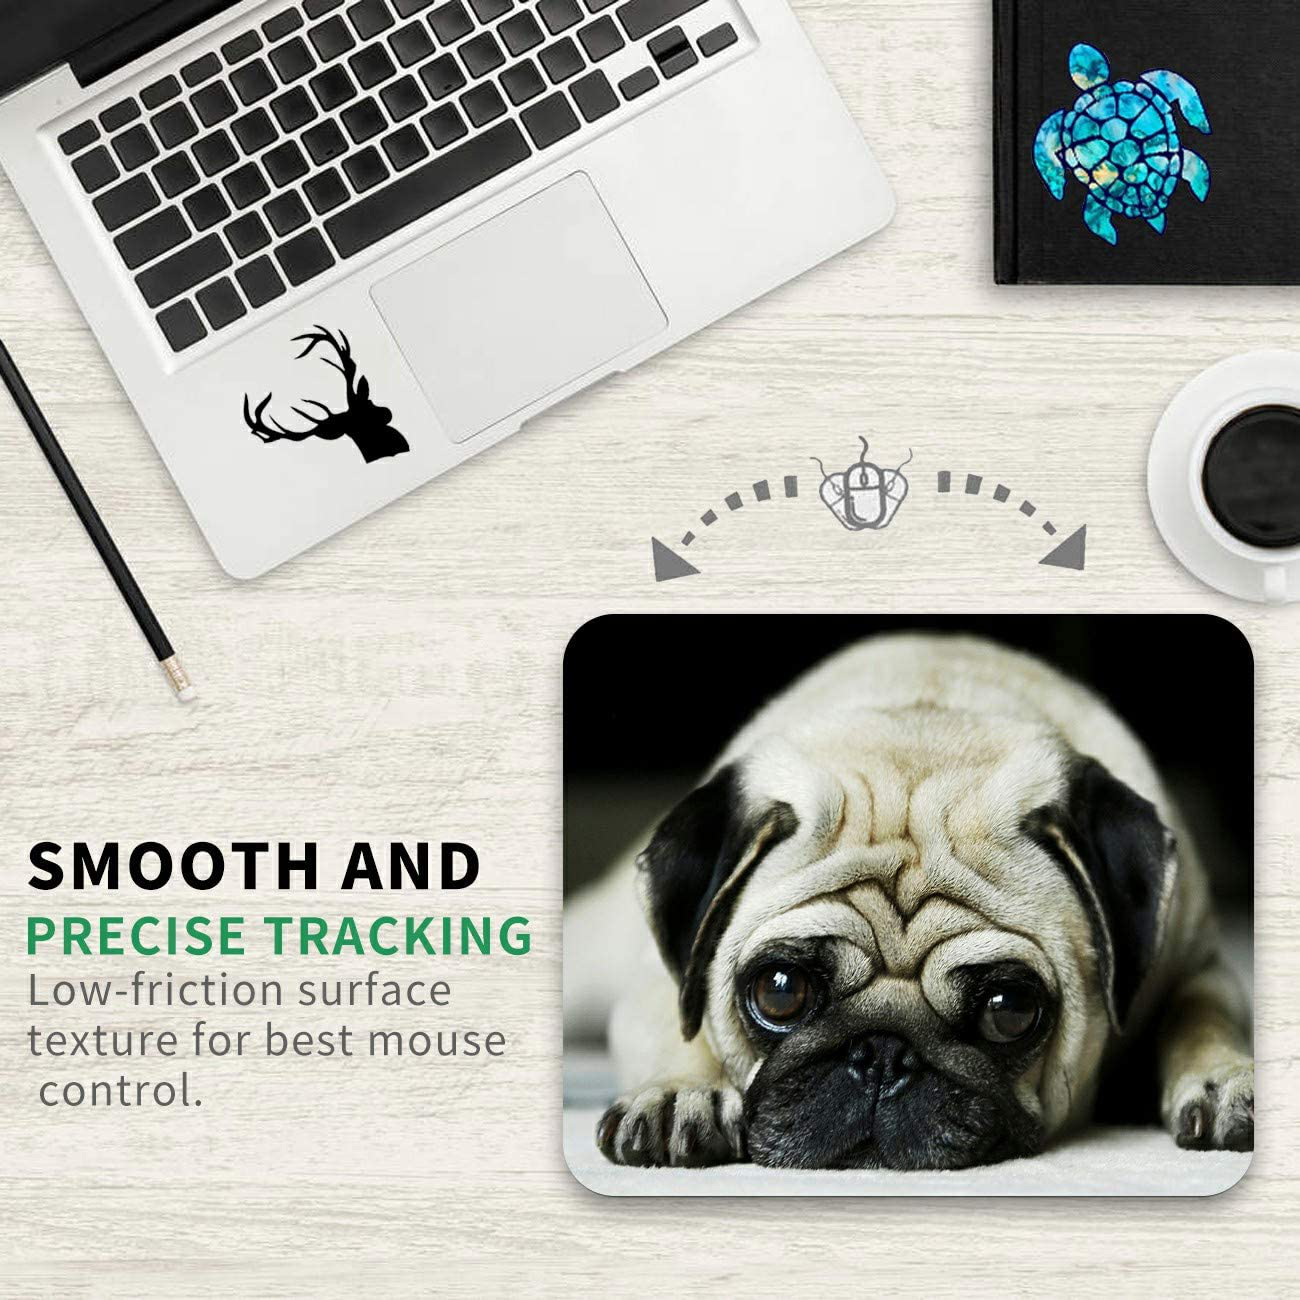 Gaming Mouse Pad Mat Cute Dog Mousepads with Cute Stickers Non-Slip Rubber Base Square Mouse Pads for Laptop Compute Working Home Office Accessories